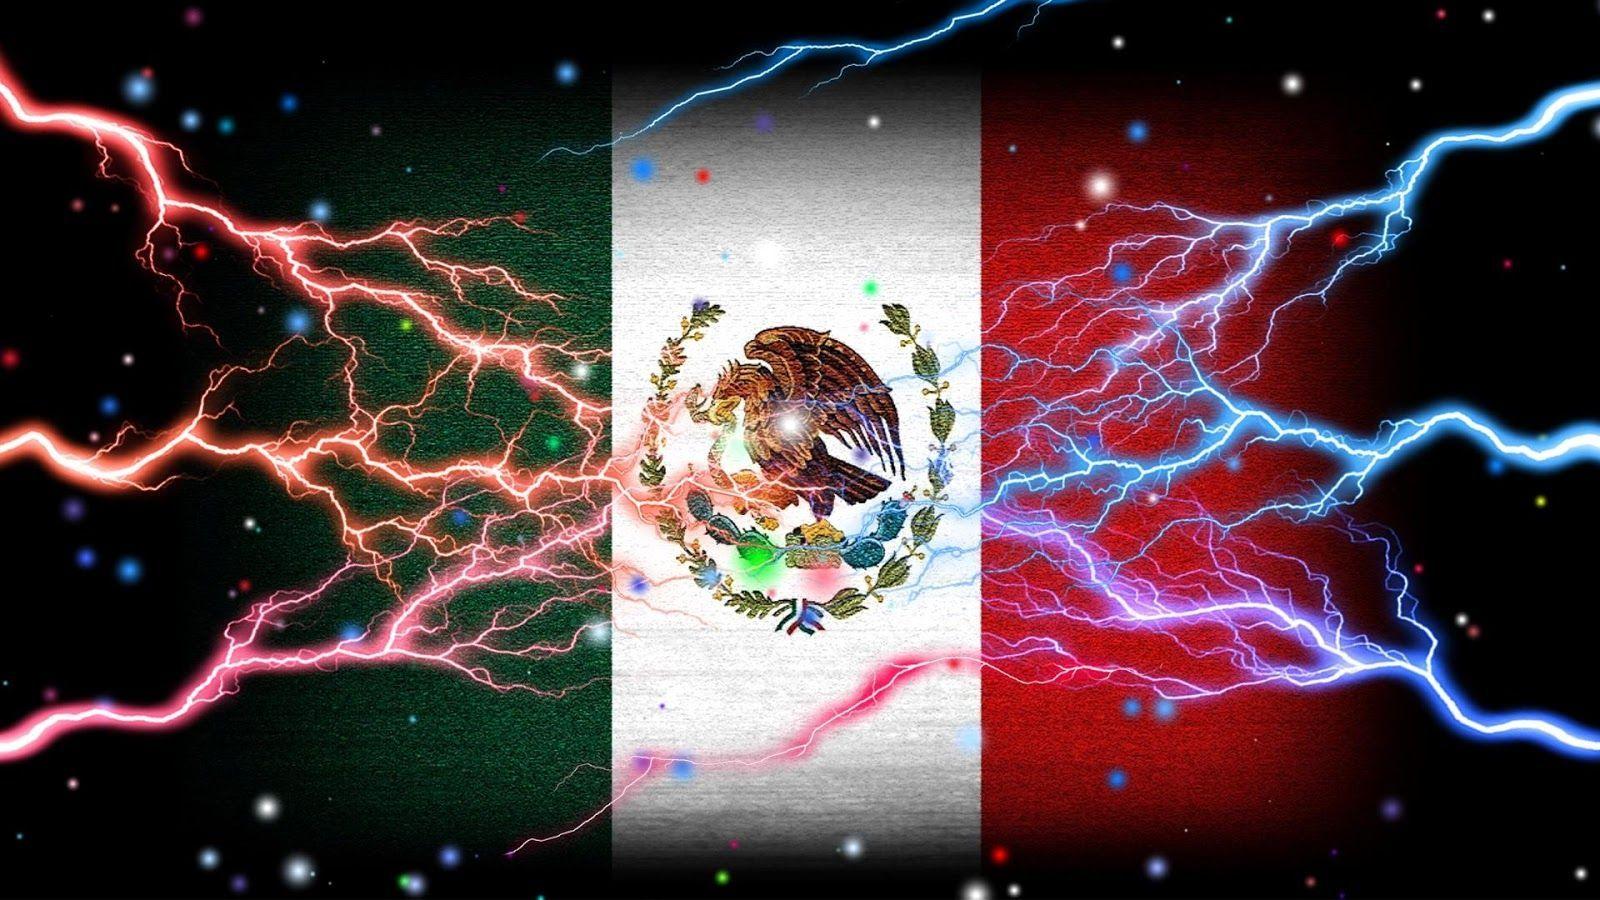 Mexican American Flag Background Png Mexican Flag Png  Etsy